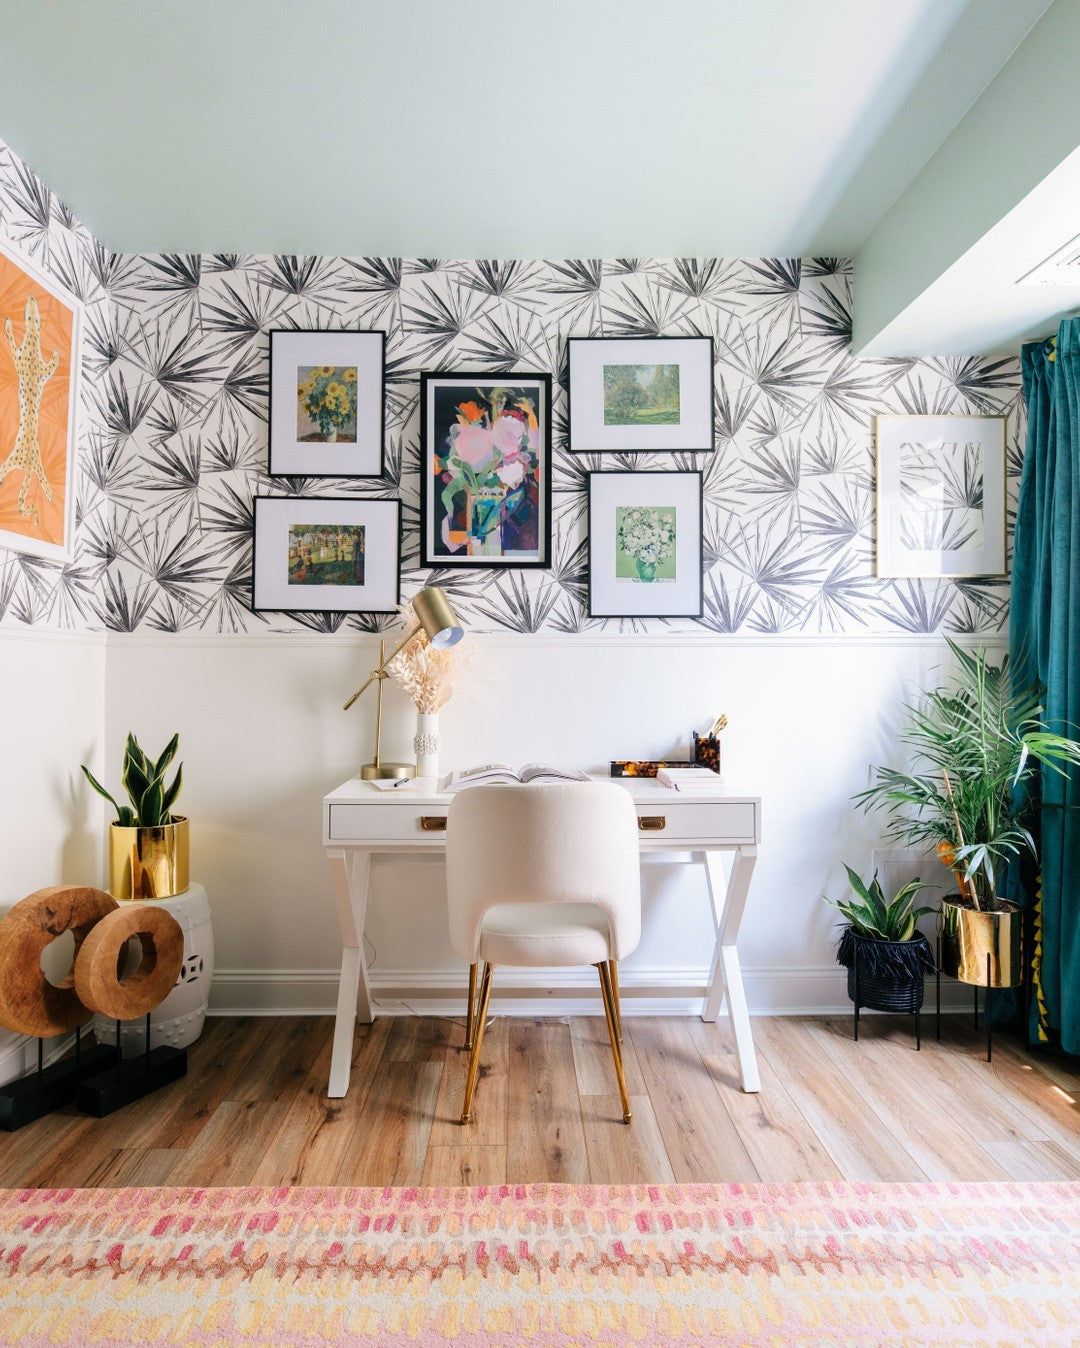 Creative paint ideas to inspire your next paint project. This home office features a painted ceiling in Headspace by Clare